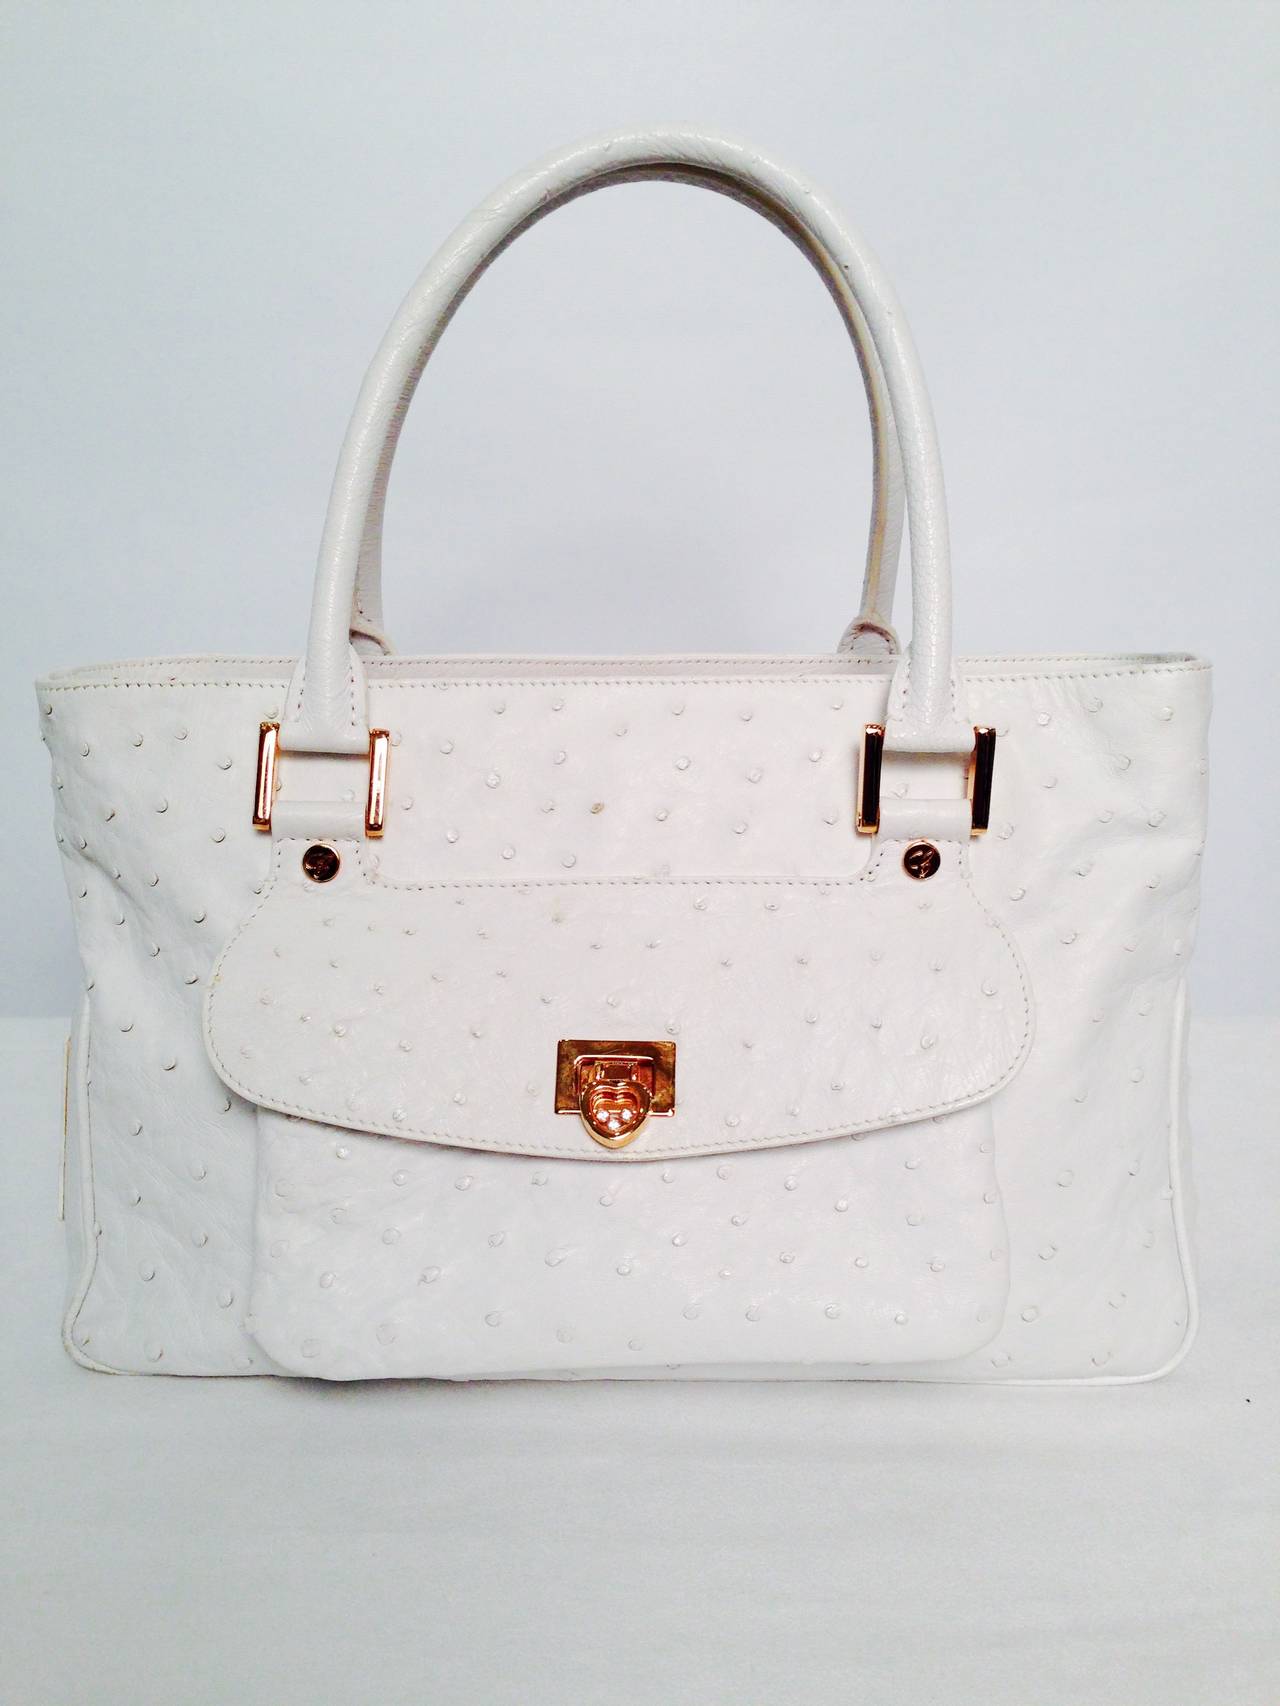 Chopard White Ostrich Satchel proves that this venerable Swiss company makes more than just exquisite watches!  Luxurious ostrich is used to create a satchel fit for a lady.  Features four internal compartments - two internal pockets are zippered. 